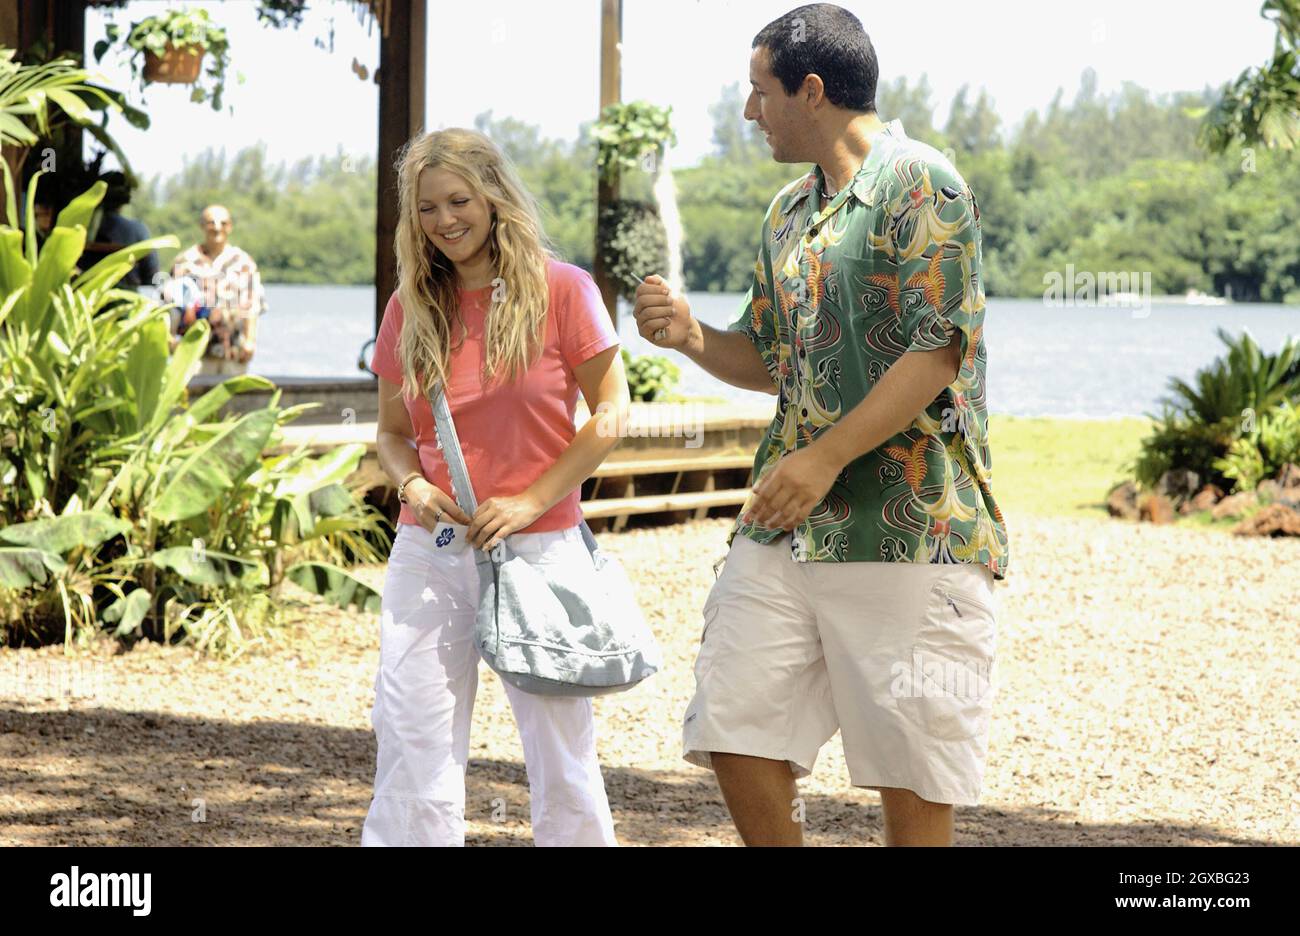 Drew Barrymoore and Adam Sandler in film still from 50 First Dates.  Stock Photo